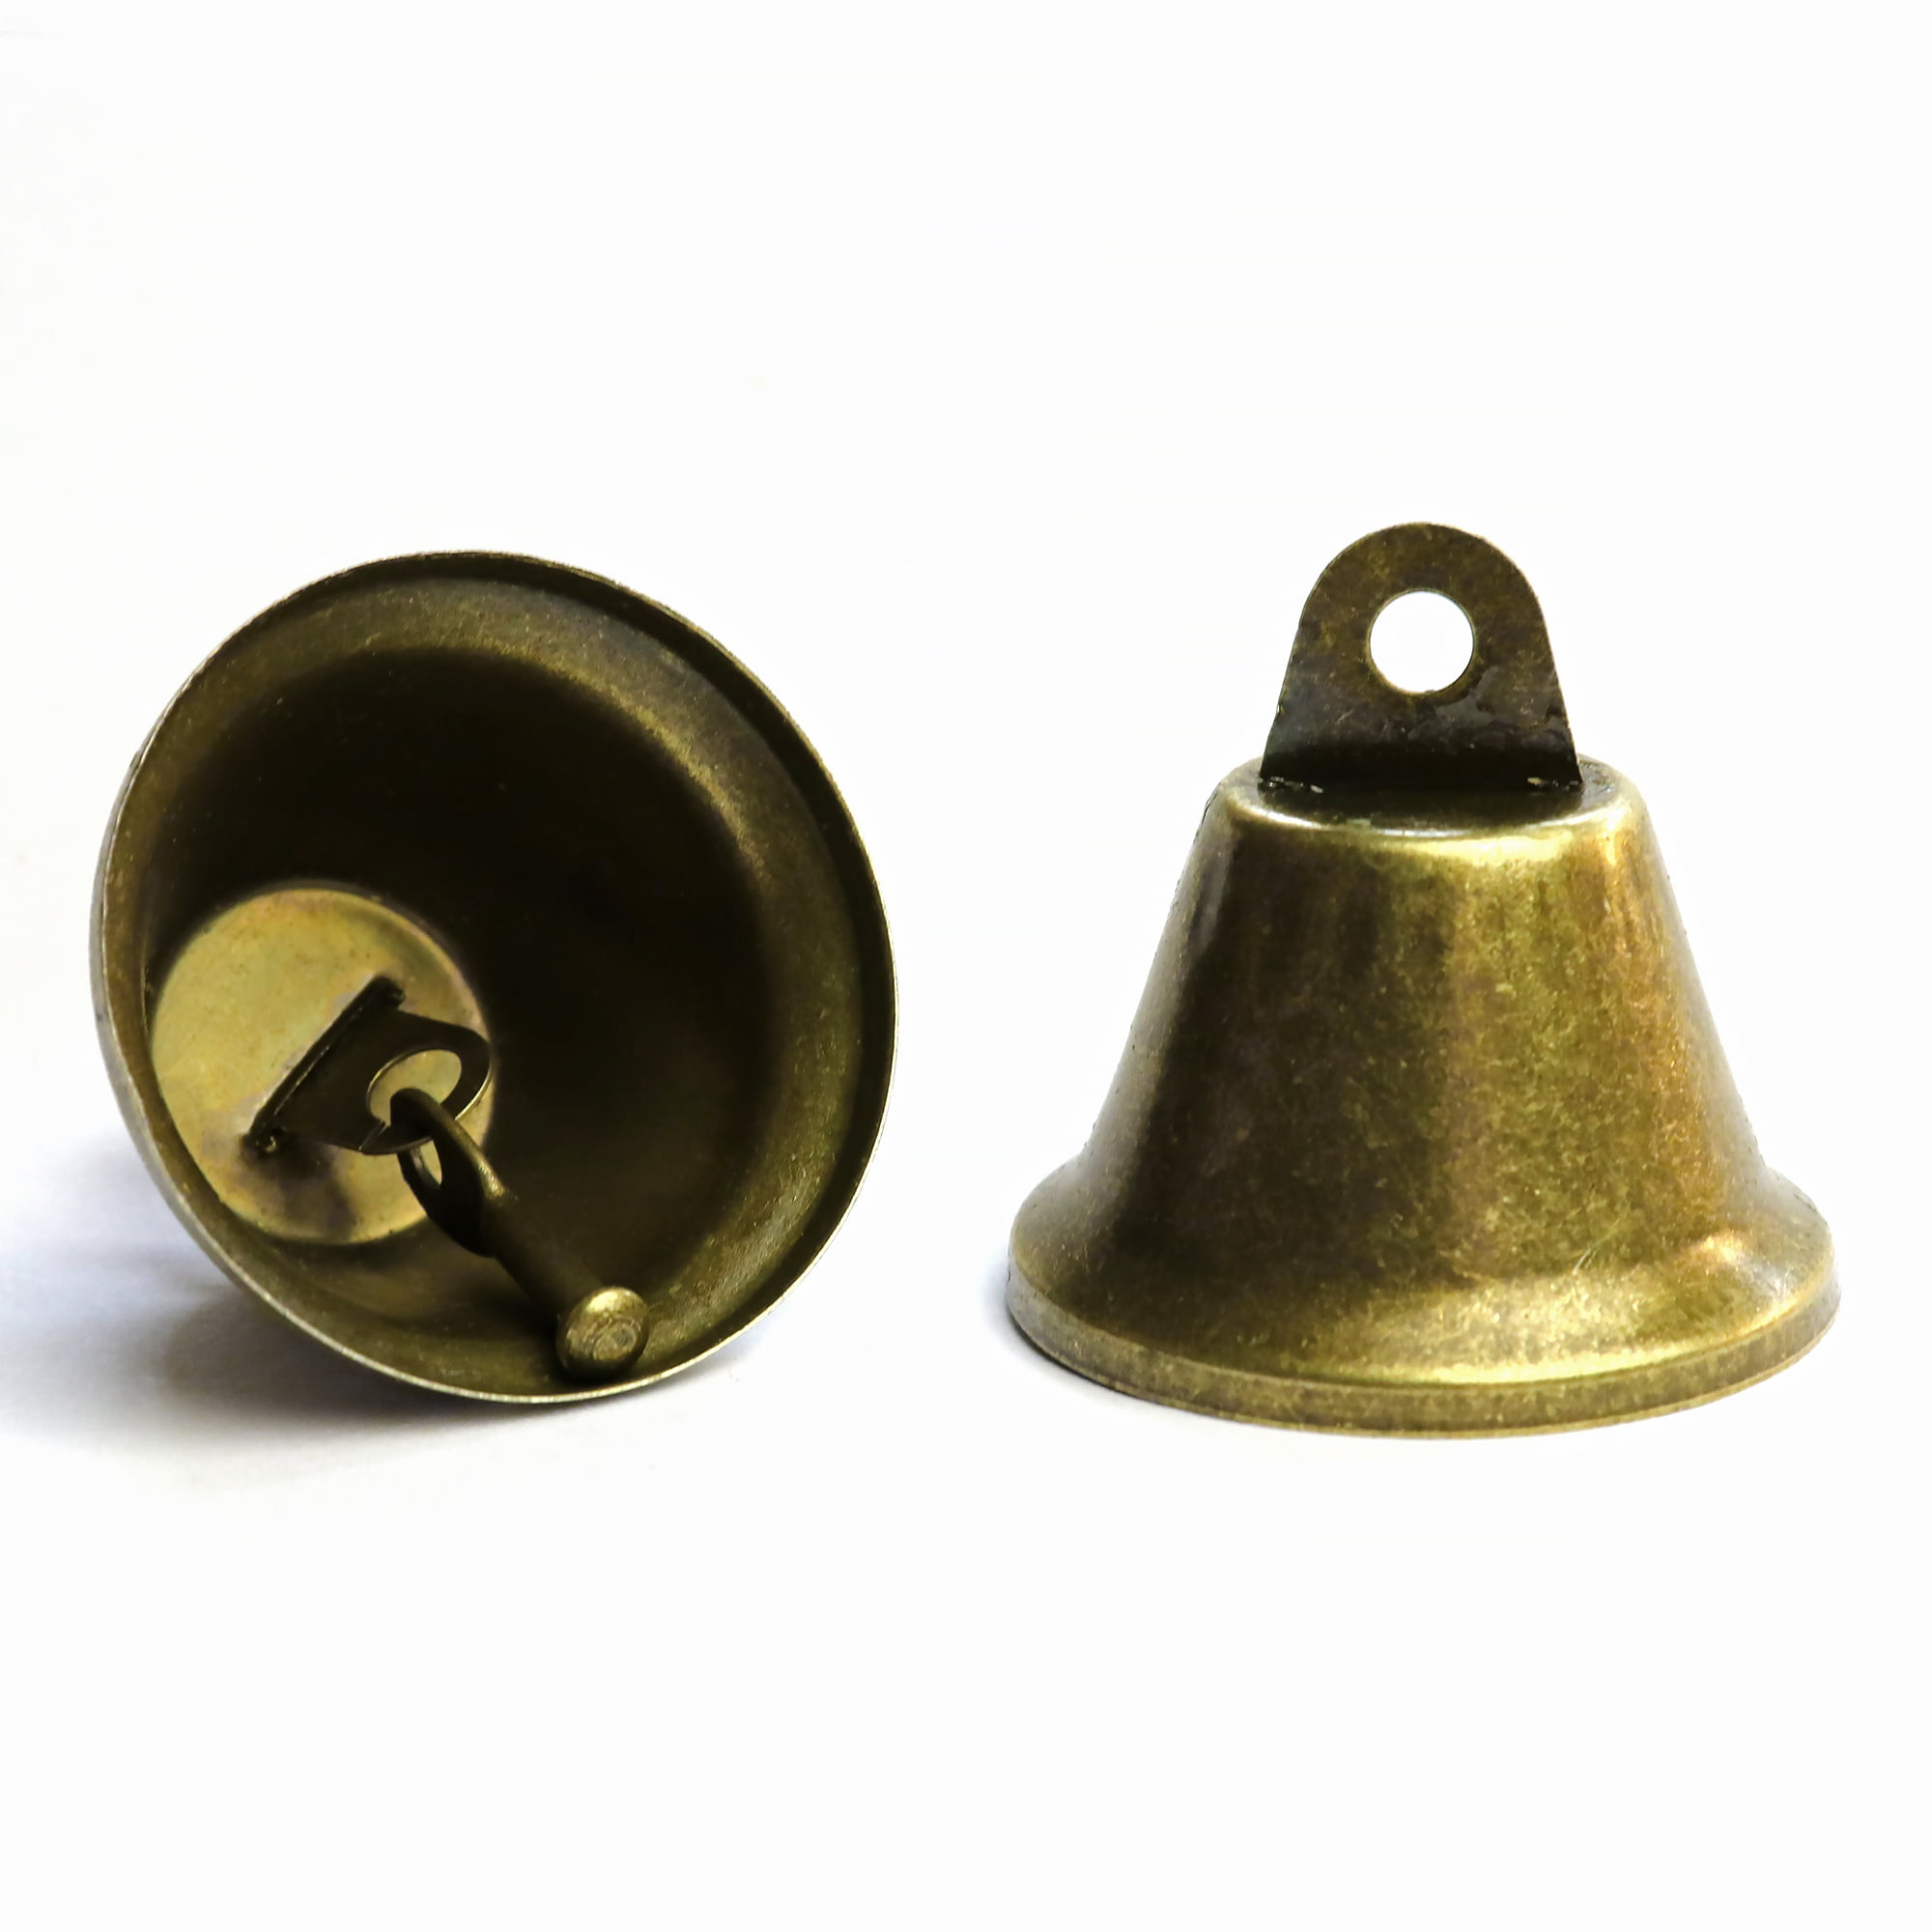 Vintage Bronze Jingle Bells Craft Bells 25mm / 1 inch for Dog Potty Training, Housebreaking, Wind Chimes, Christmas Bell (50 Pieces), Men's, Size: 25